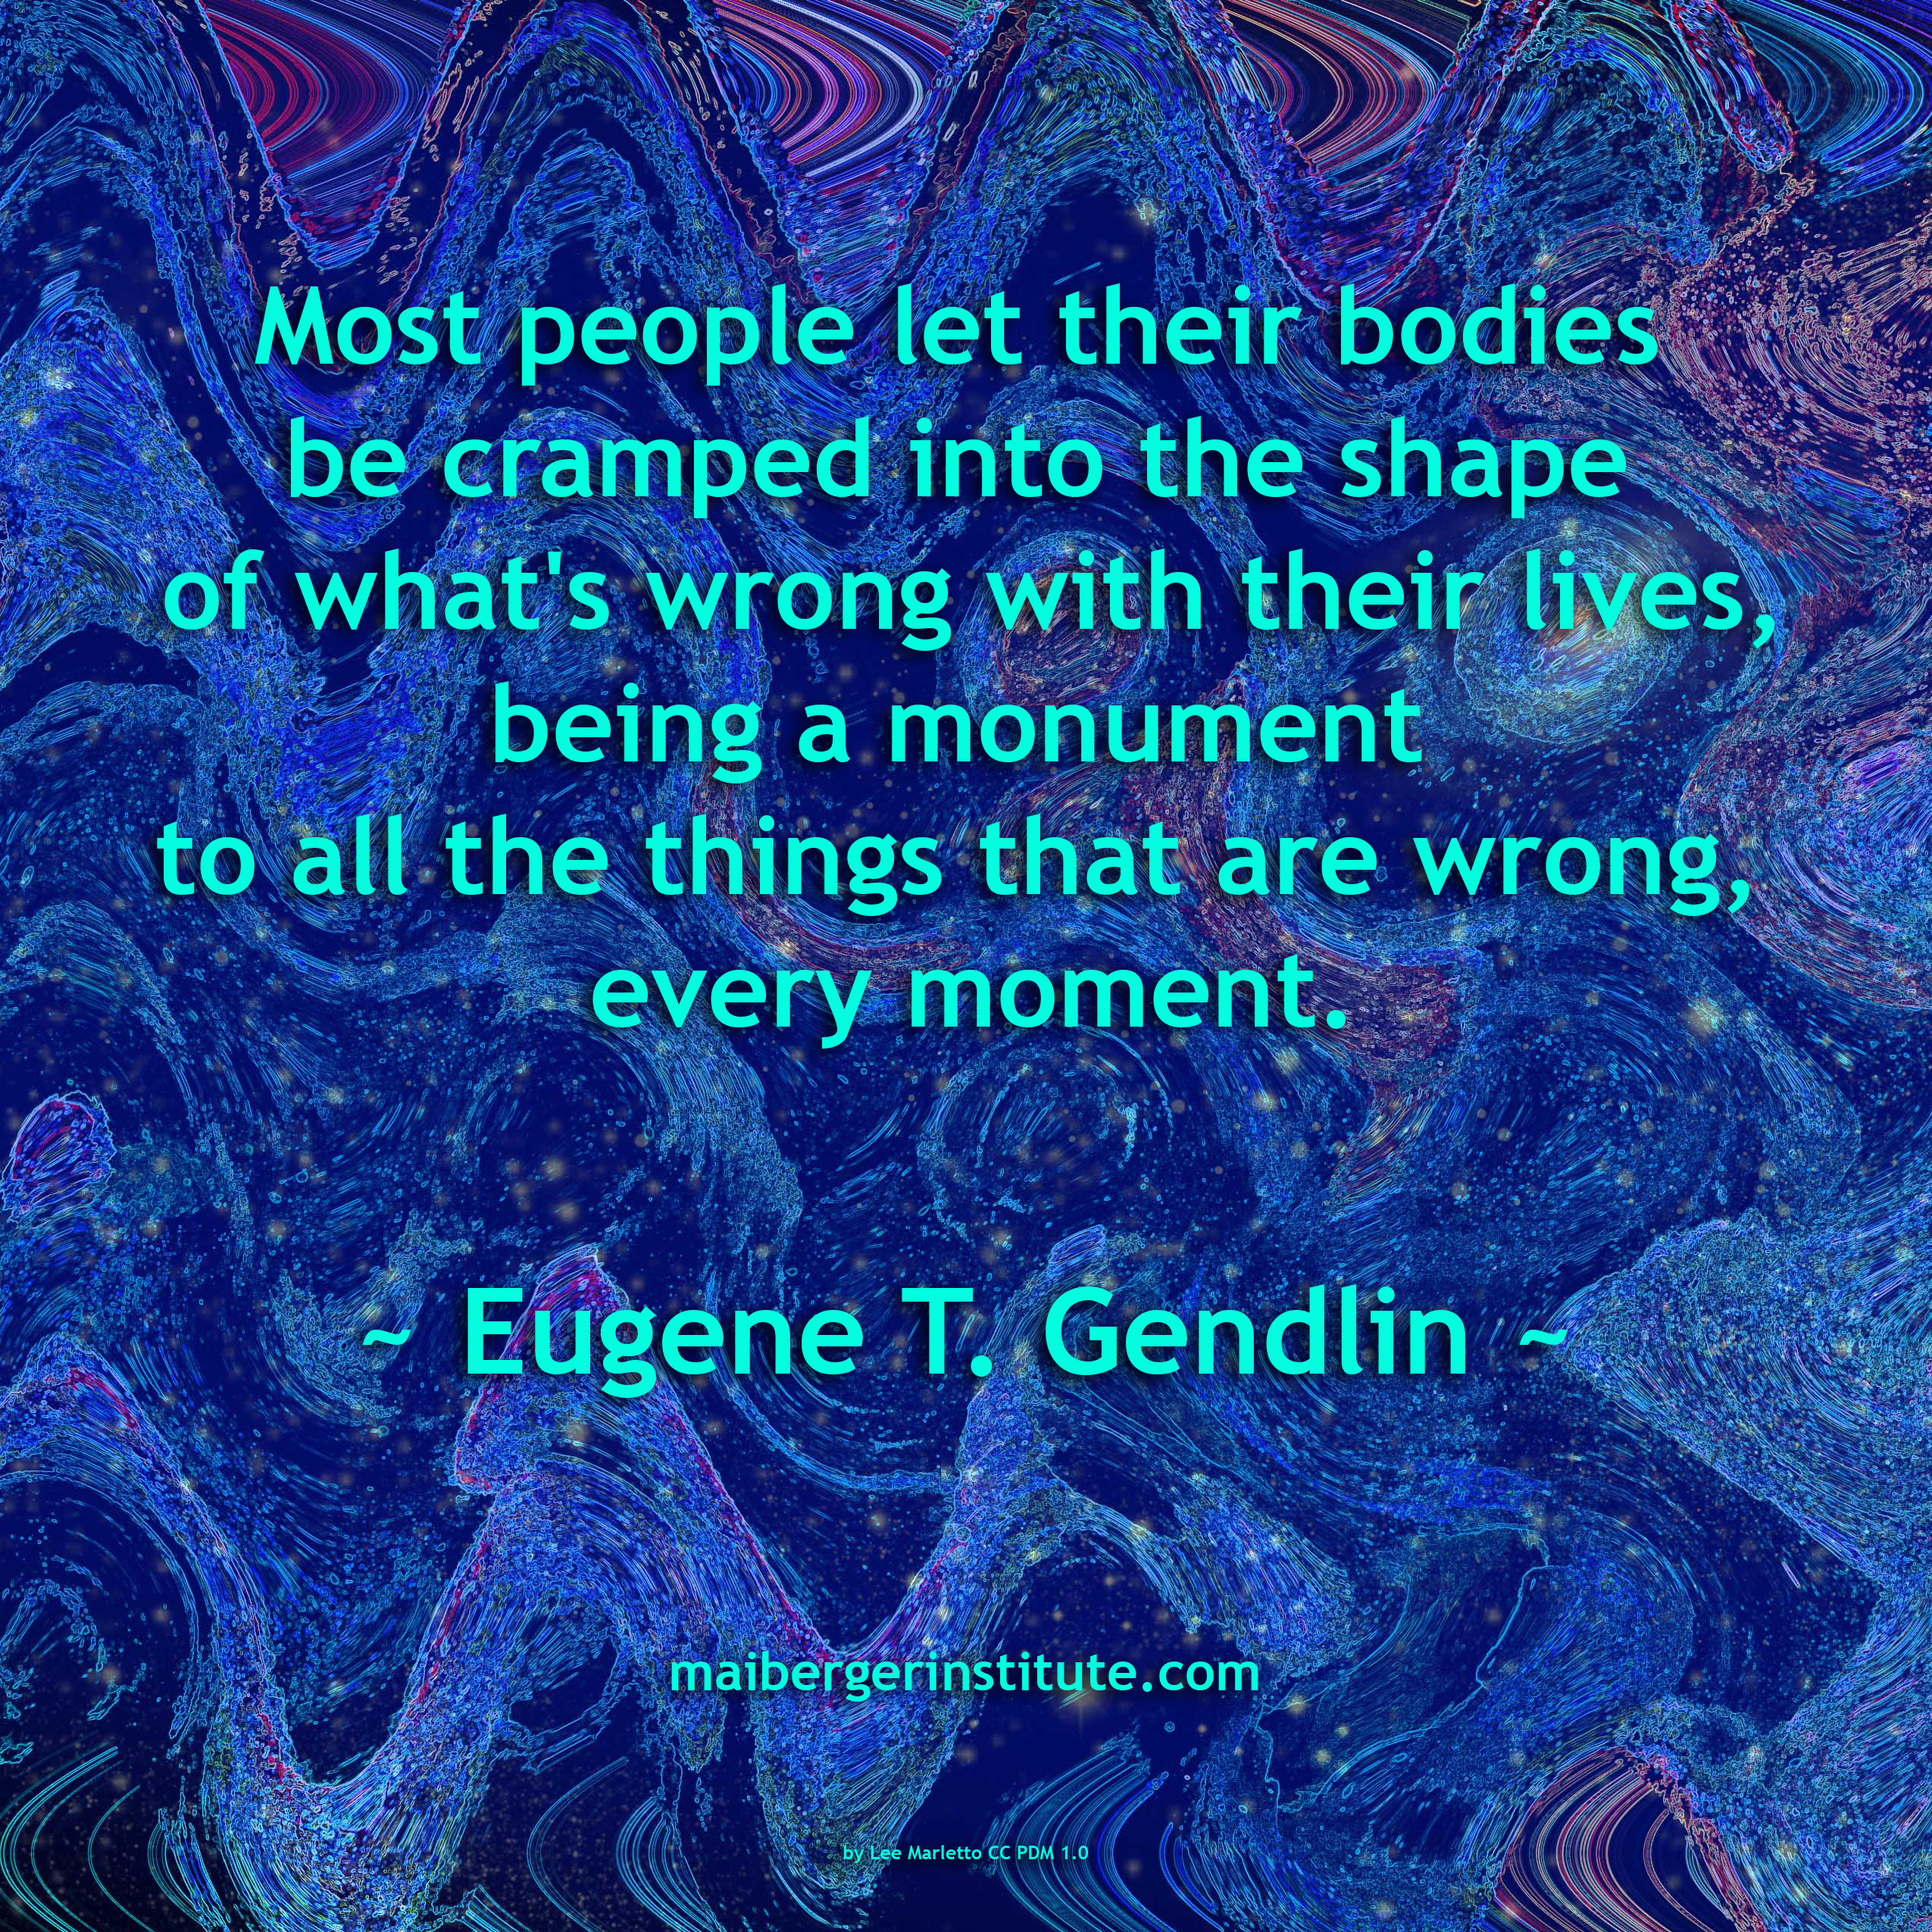 "Most people let their bodies be cramped into the shape of what's wrong with their lives, being a monument to all the things that are wrong, every moment." ~ Eugene T. Gendlin ~ image by Lee Marletto CC PDM 1.0